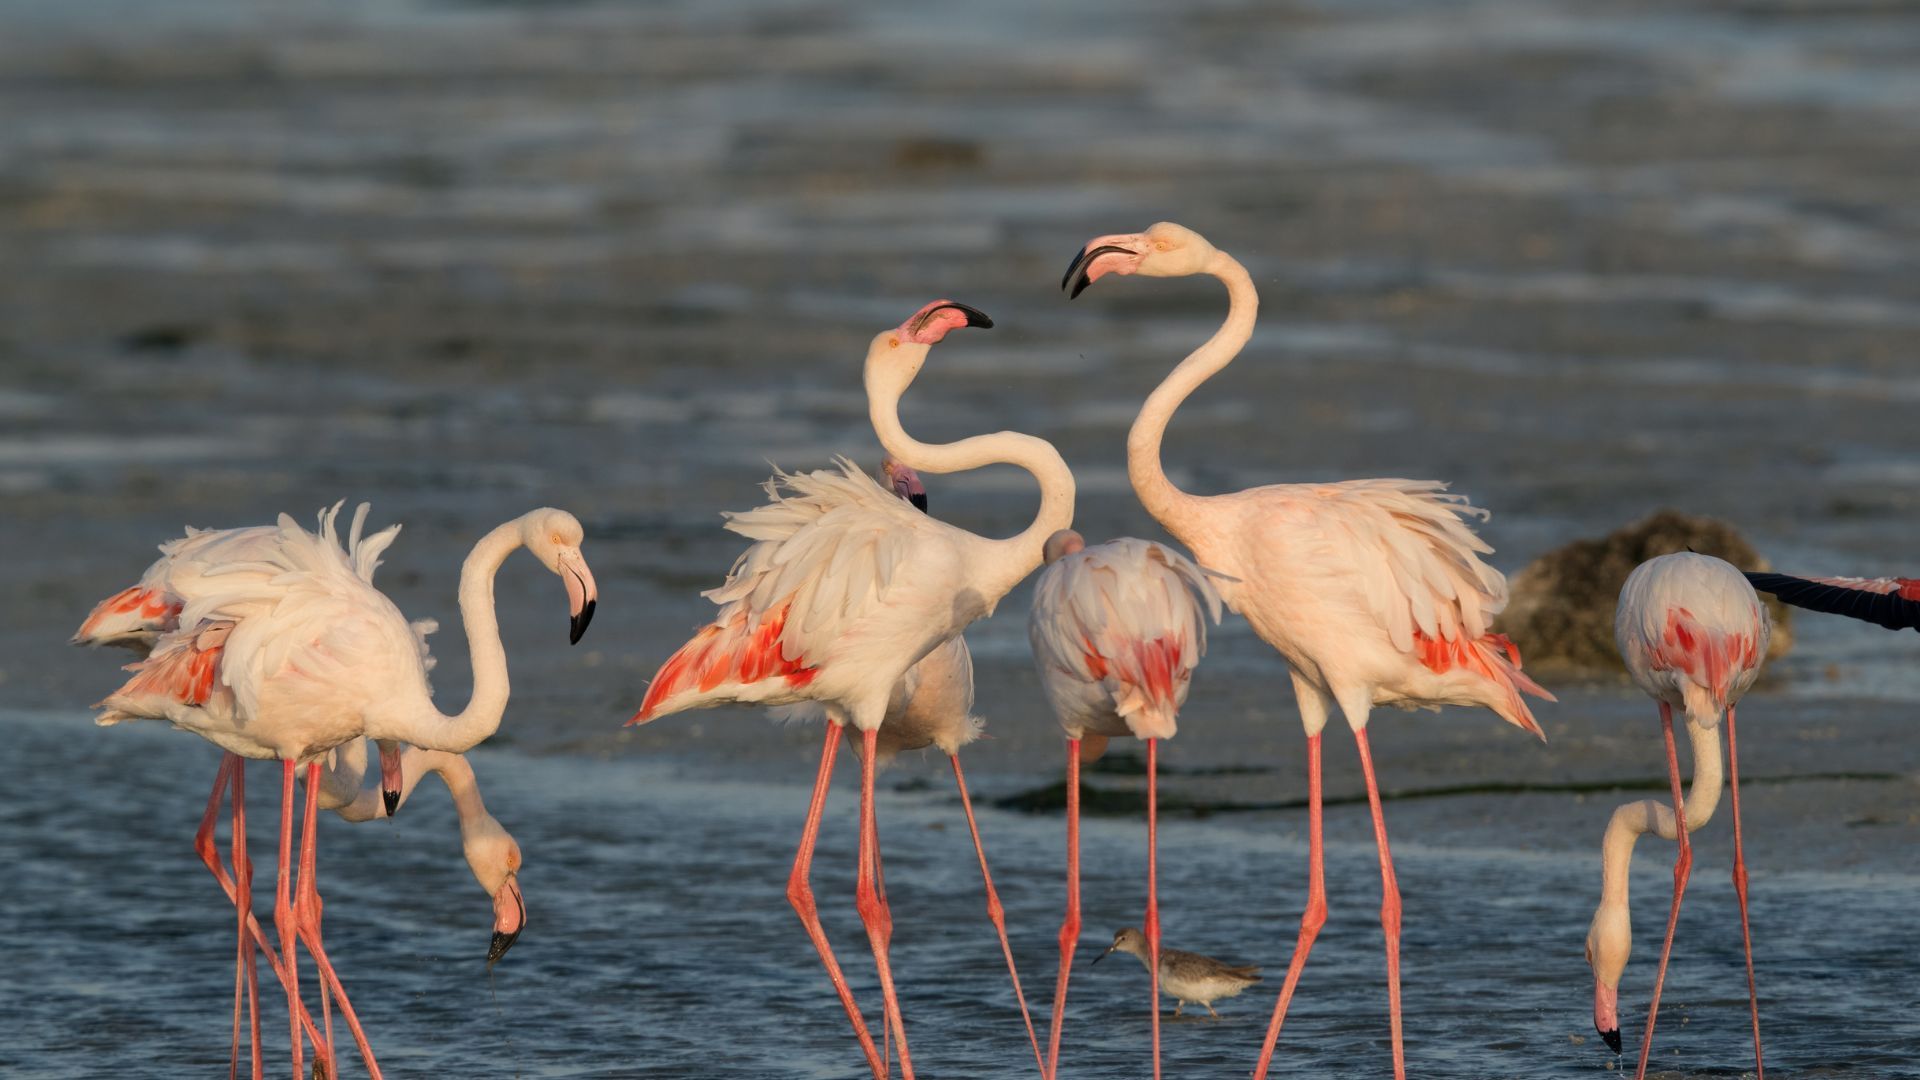 Experience Winged Beauty At The Flamingo Festival In Andhra Pradesh